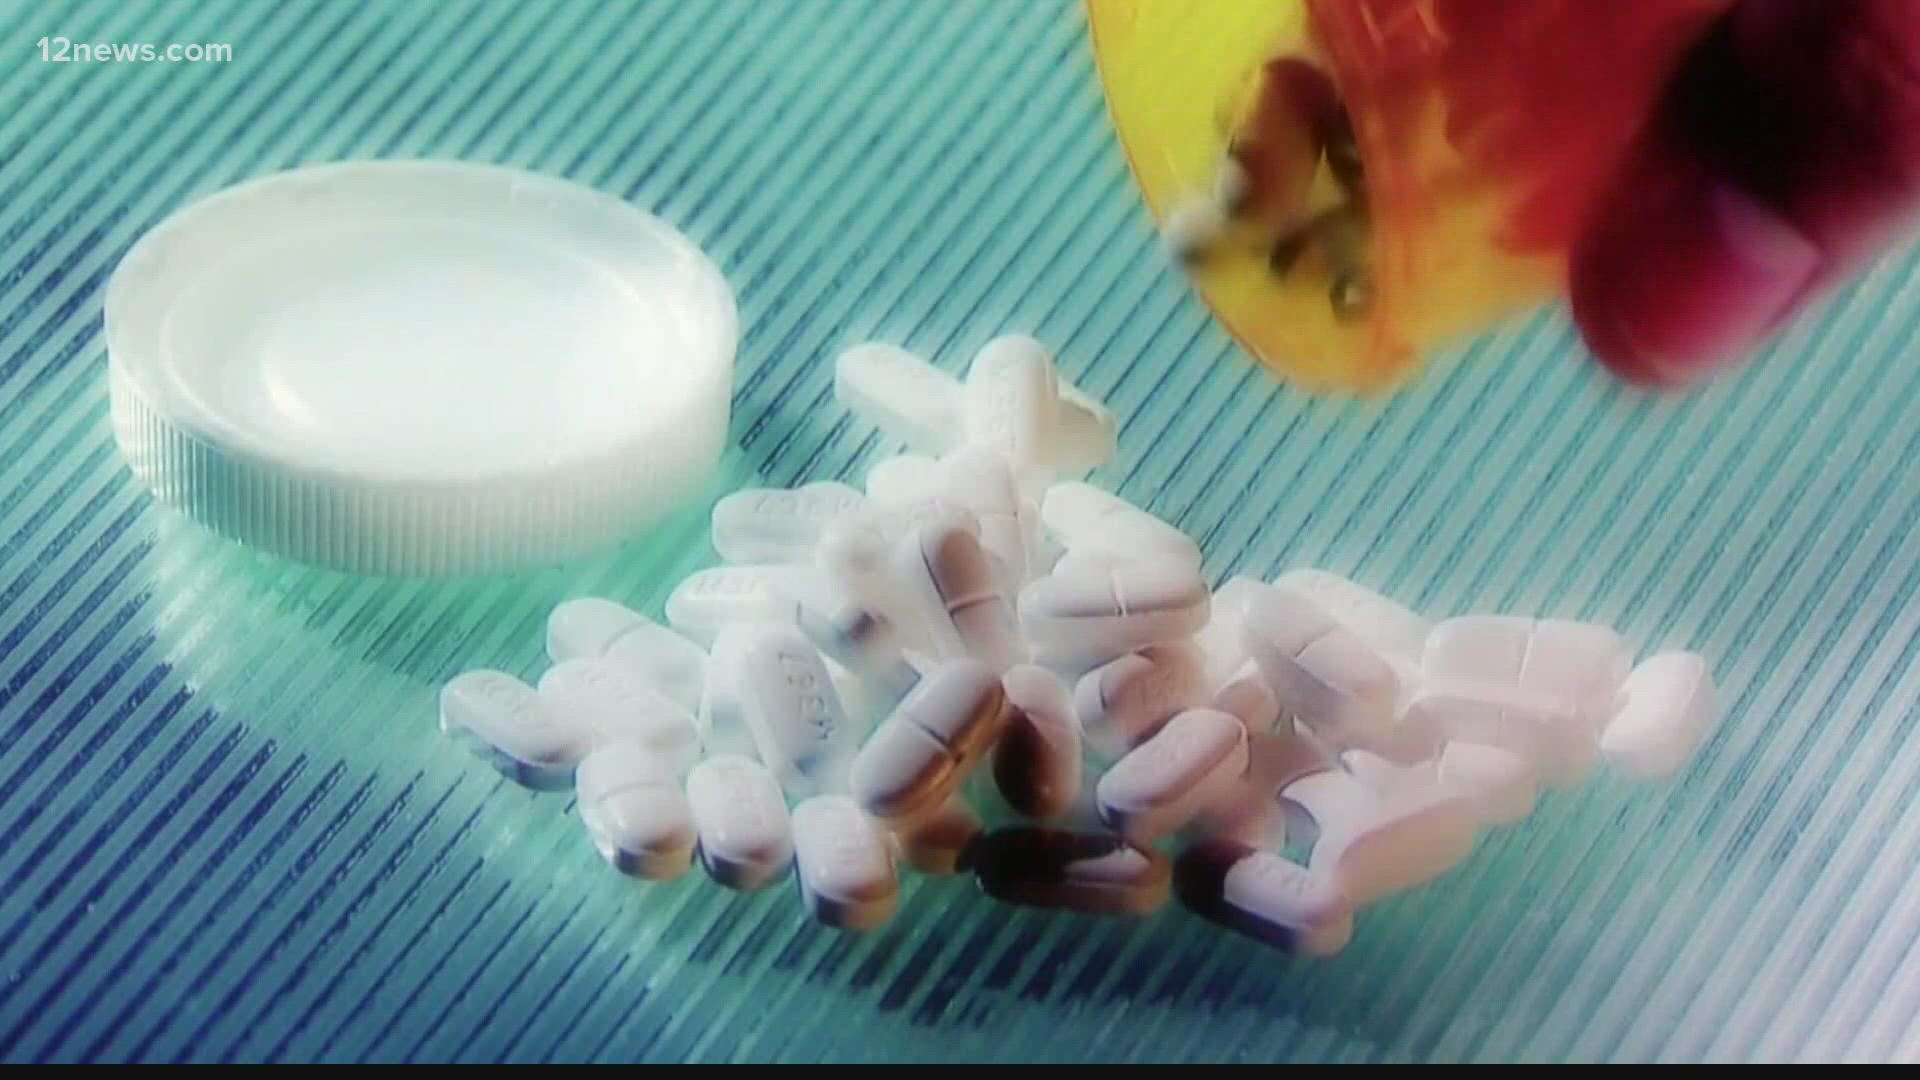 Drug overdose deaths in the U.S. surpassed 100,000 for the first time ever between May 2020 and April 2021, a grim milestone that included a 30% increase in Arizona.